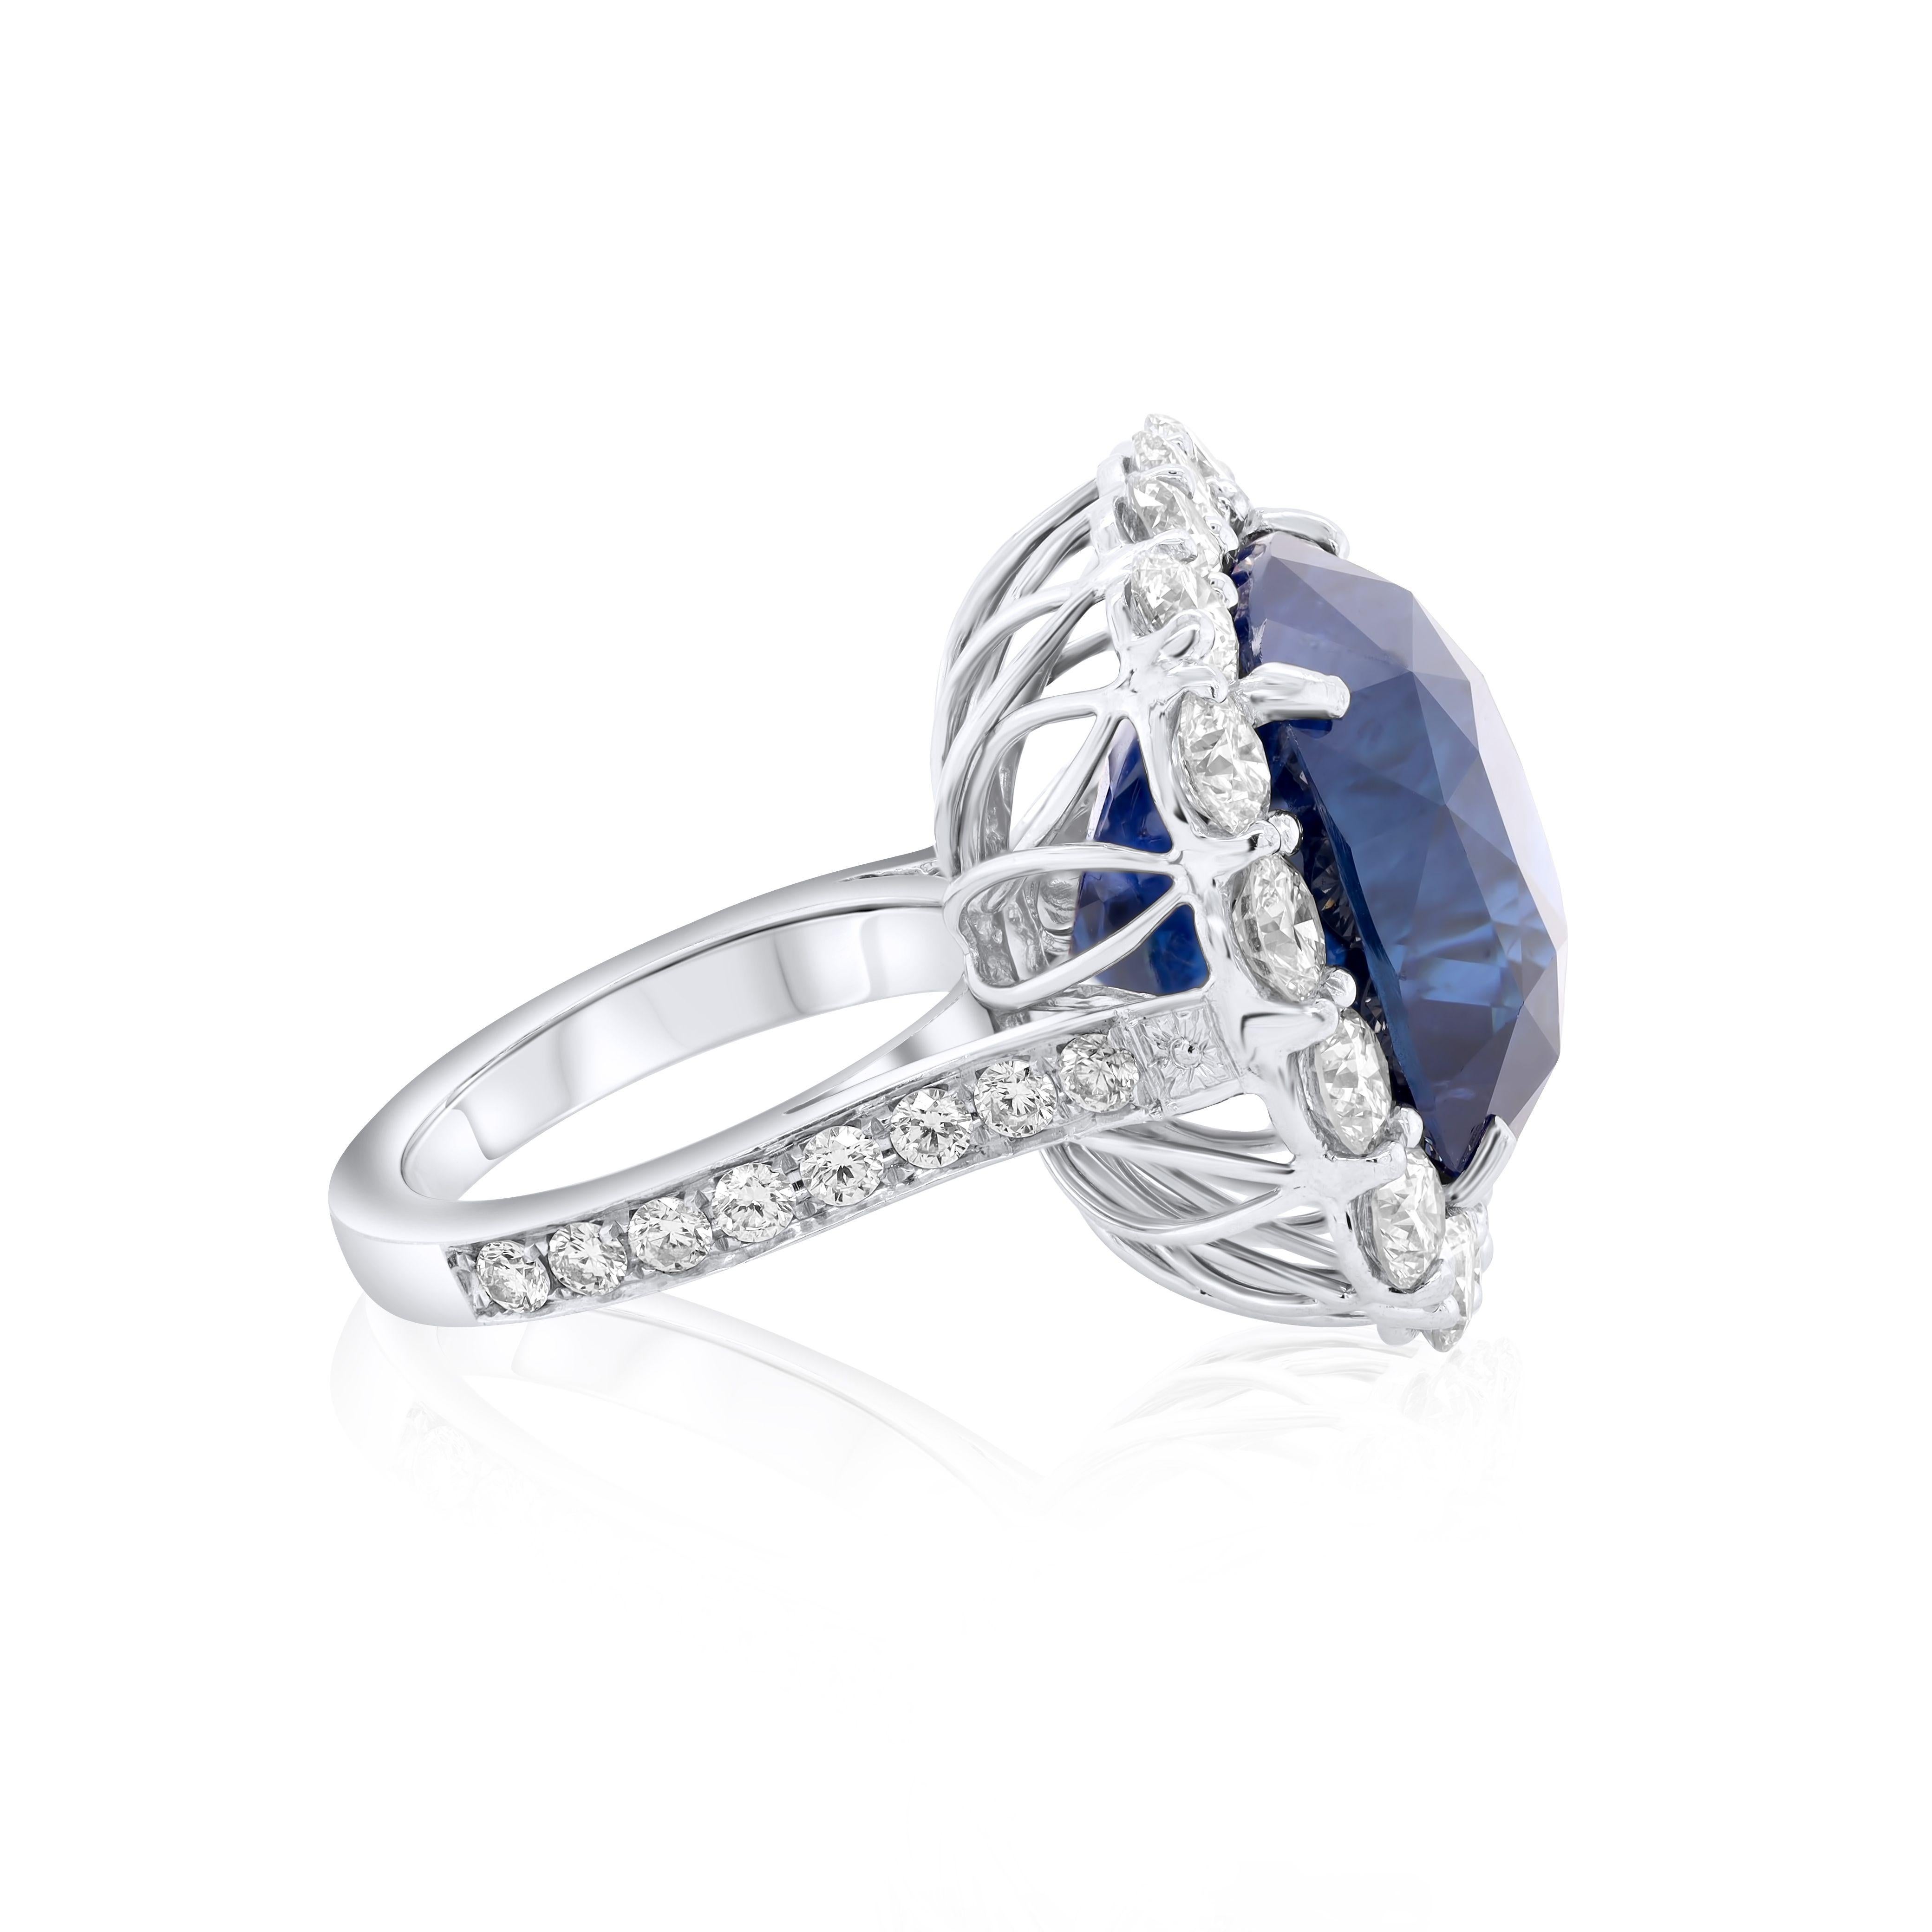 Antique Cushion Cut Classic Blue Sapphire Ring in Platinum Setting with Round Diamonds For Sale